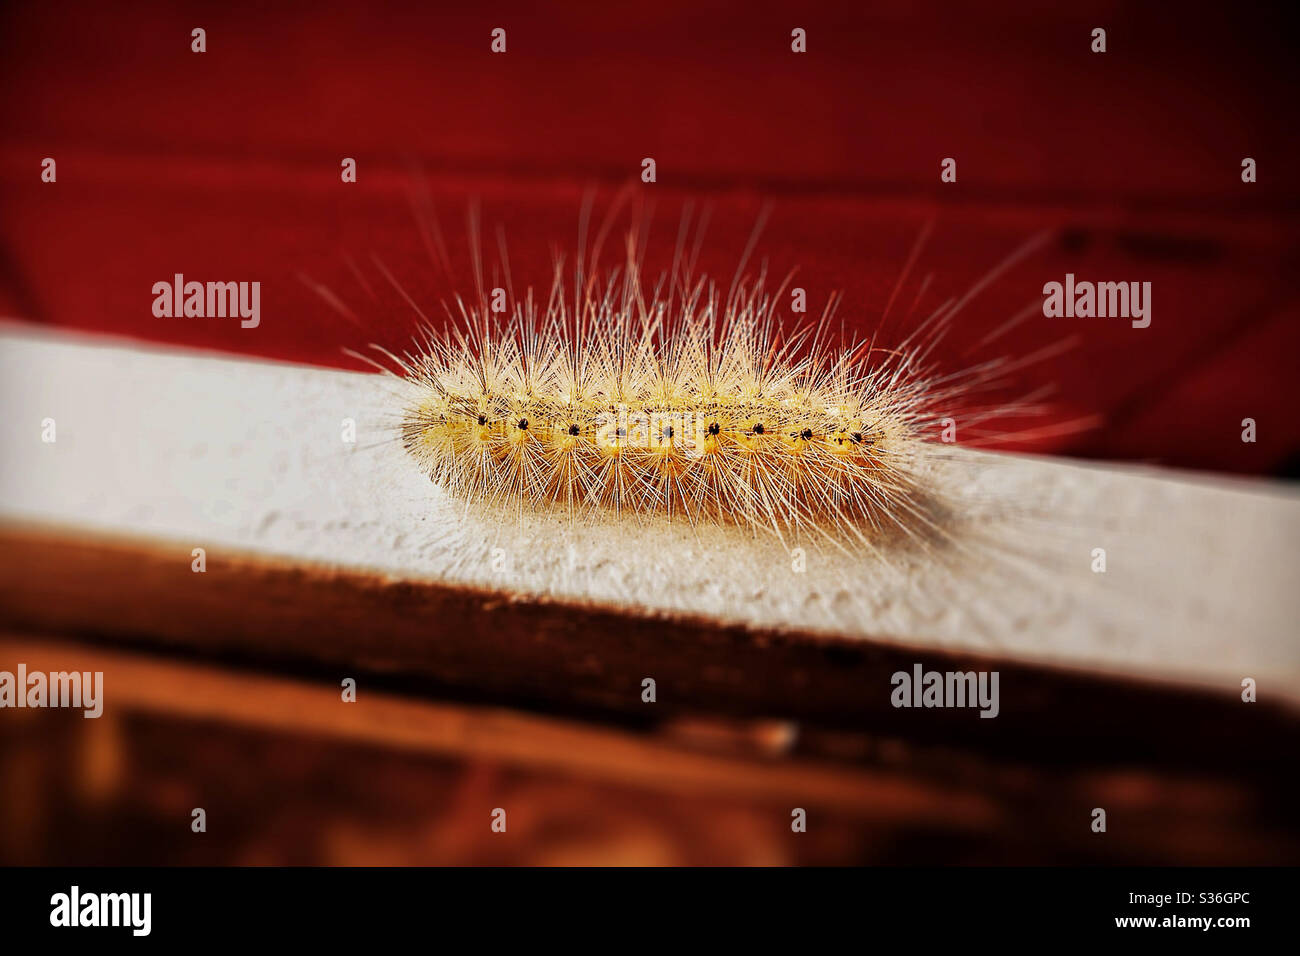 Close Up of Caterpillar Against Red Background Stock Photo